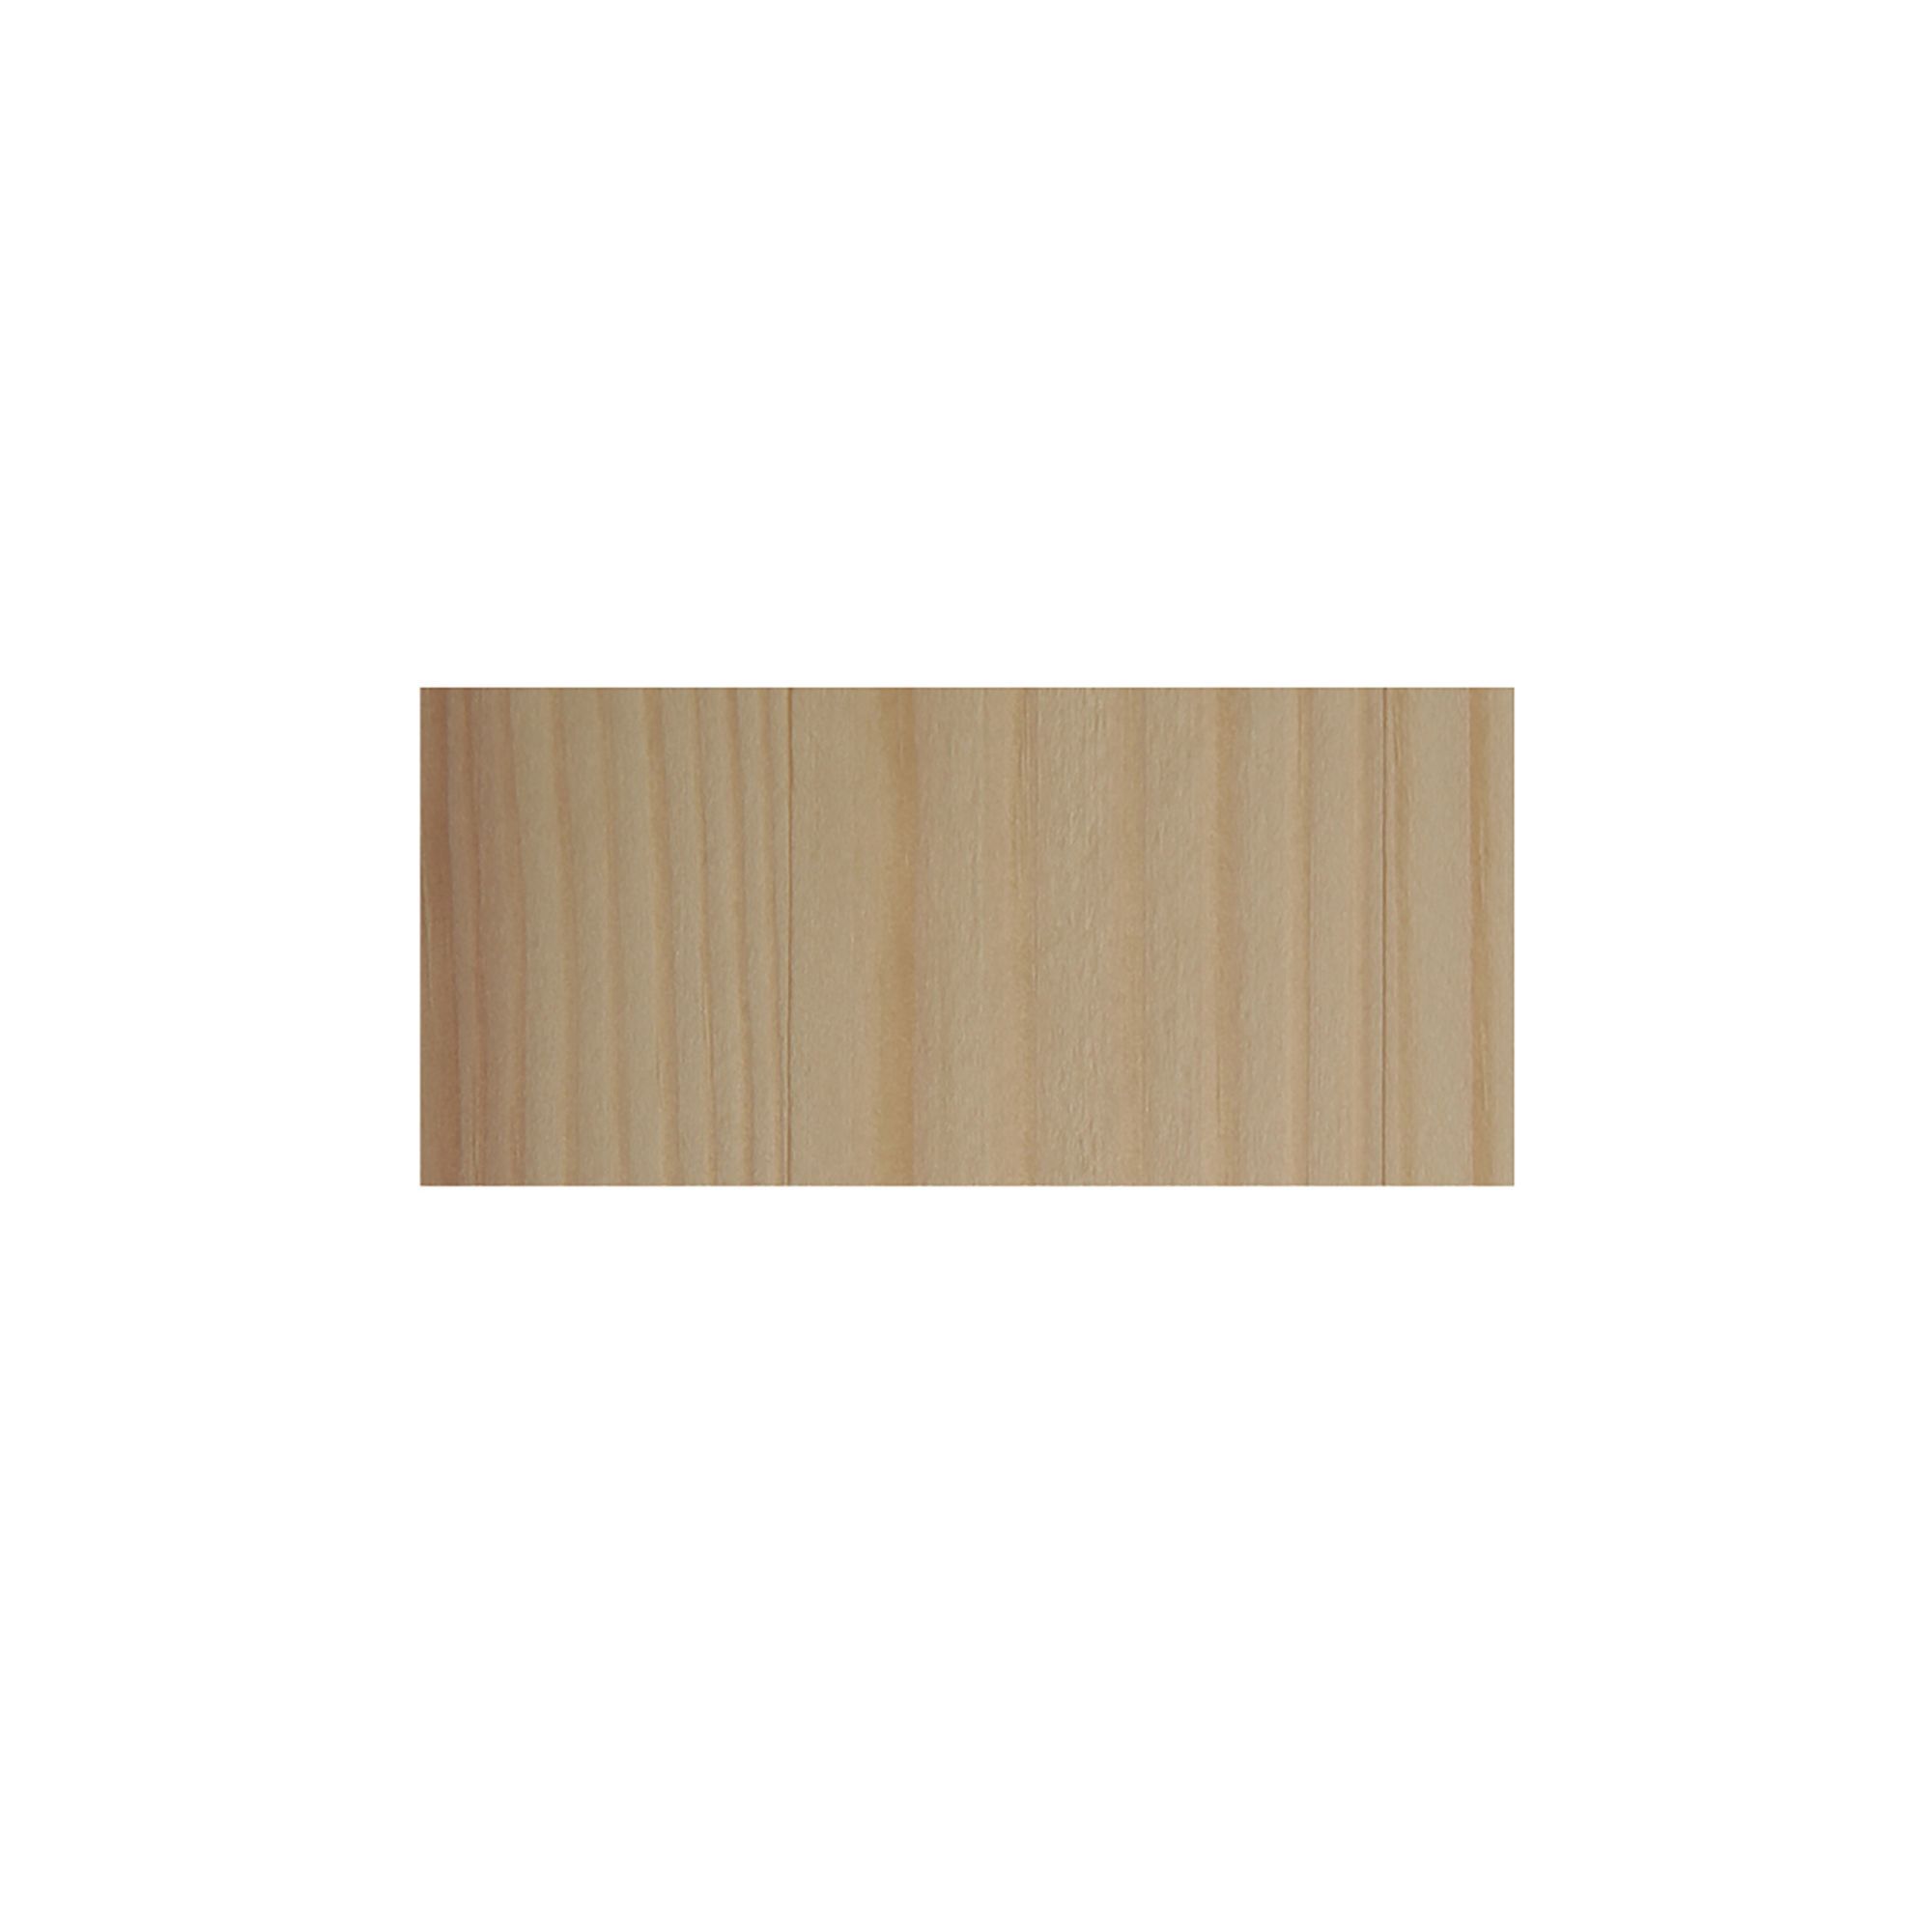 Cheshire Mouldings Smooth Planed Square edge Pine Stripwood (L)0.9m (W)46mm (T)15mm STPN53